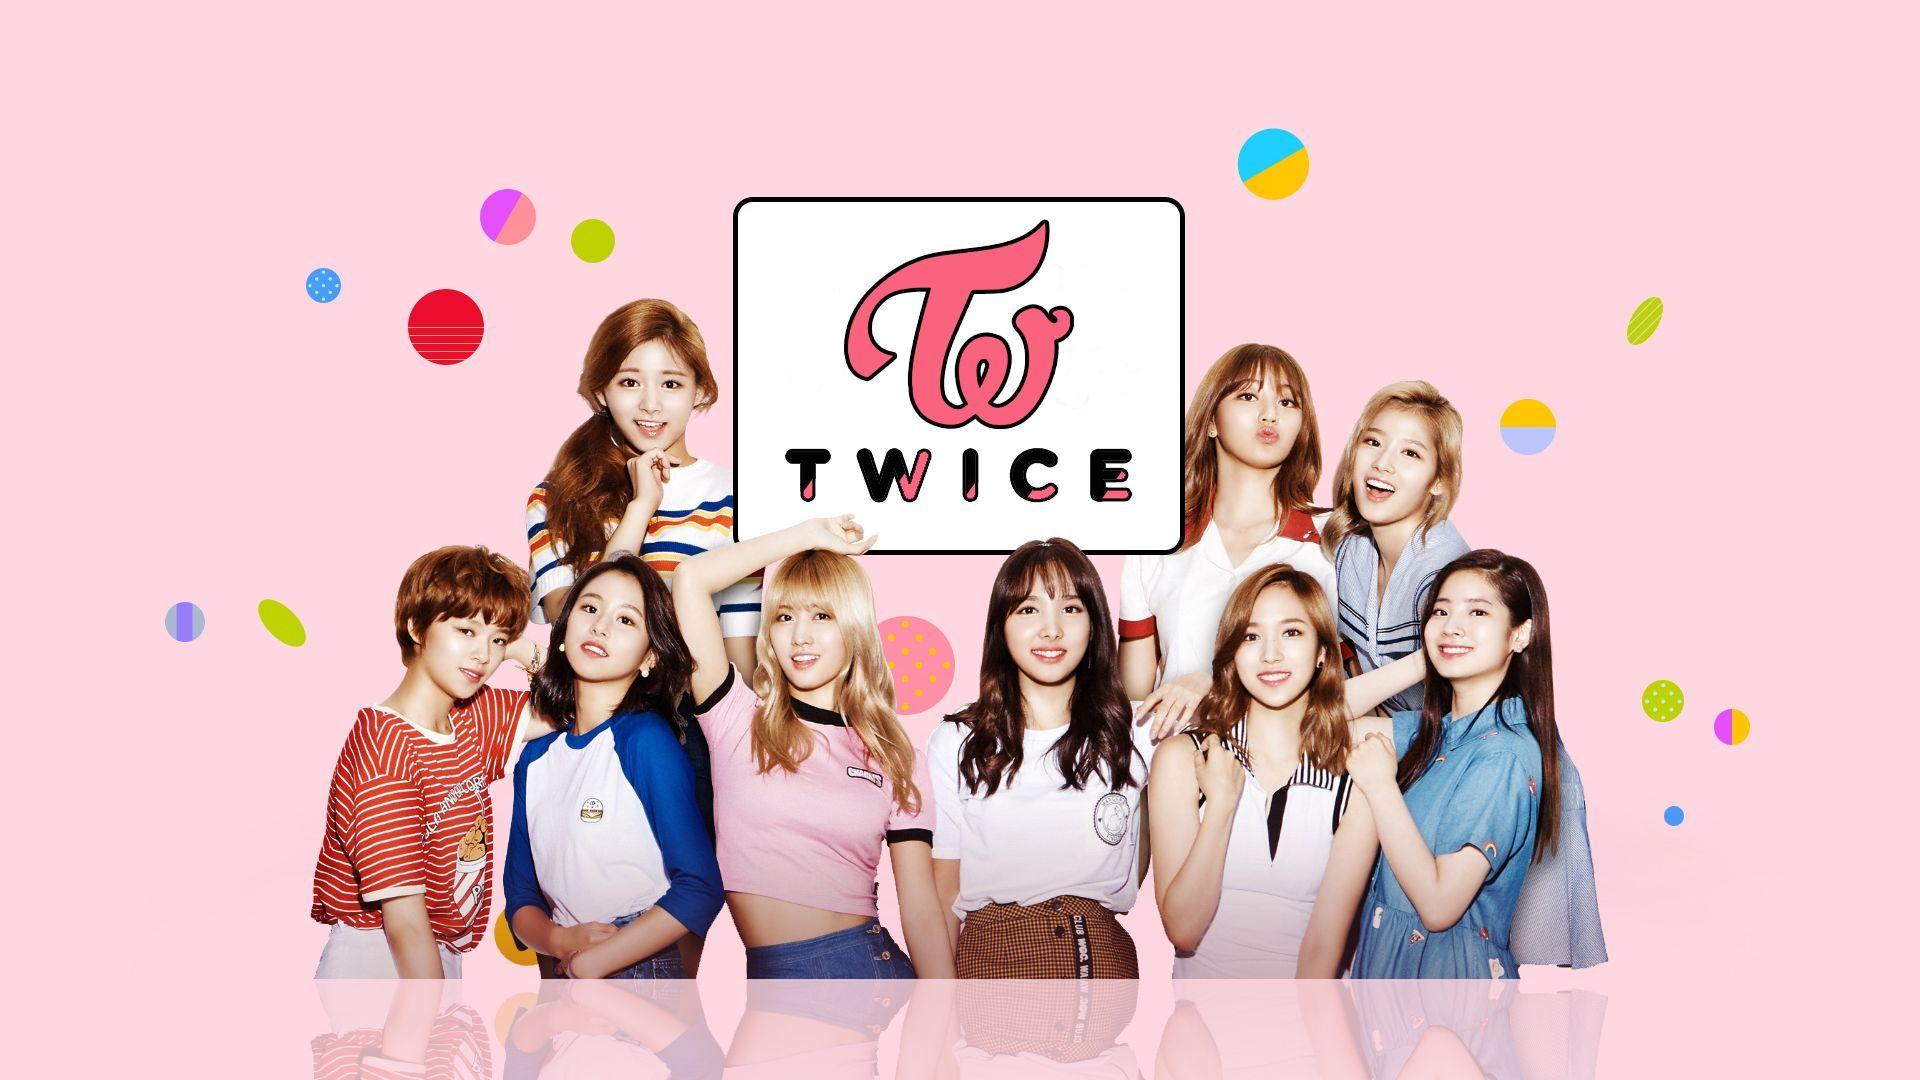 Twice Logo Pc Wallpapers Top Free Twice Logo Pc Backgrounds Wallpaperaccess